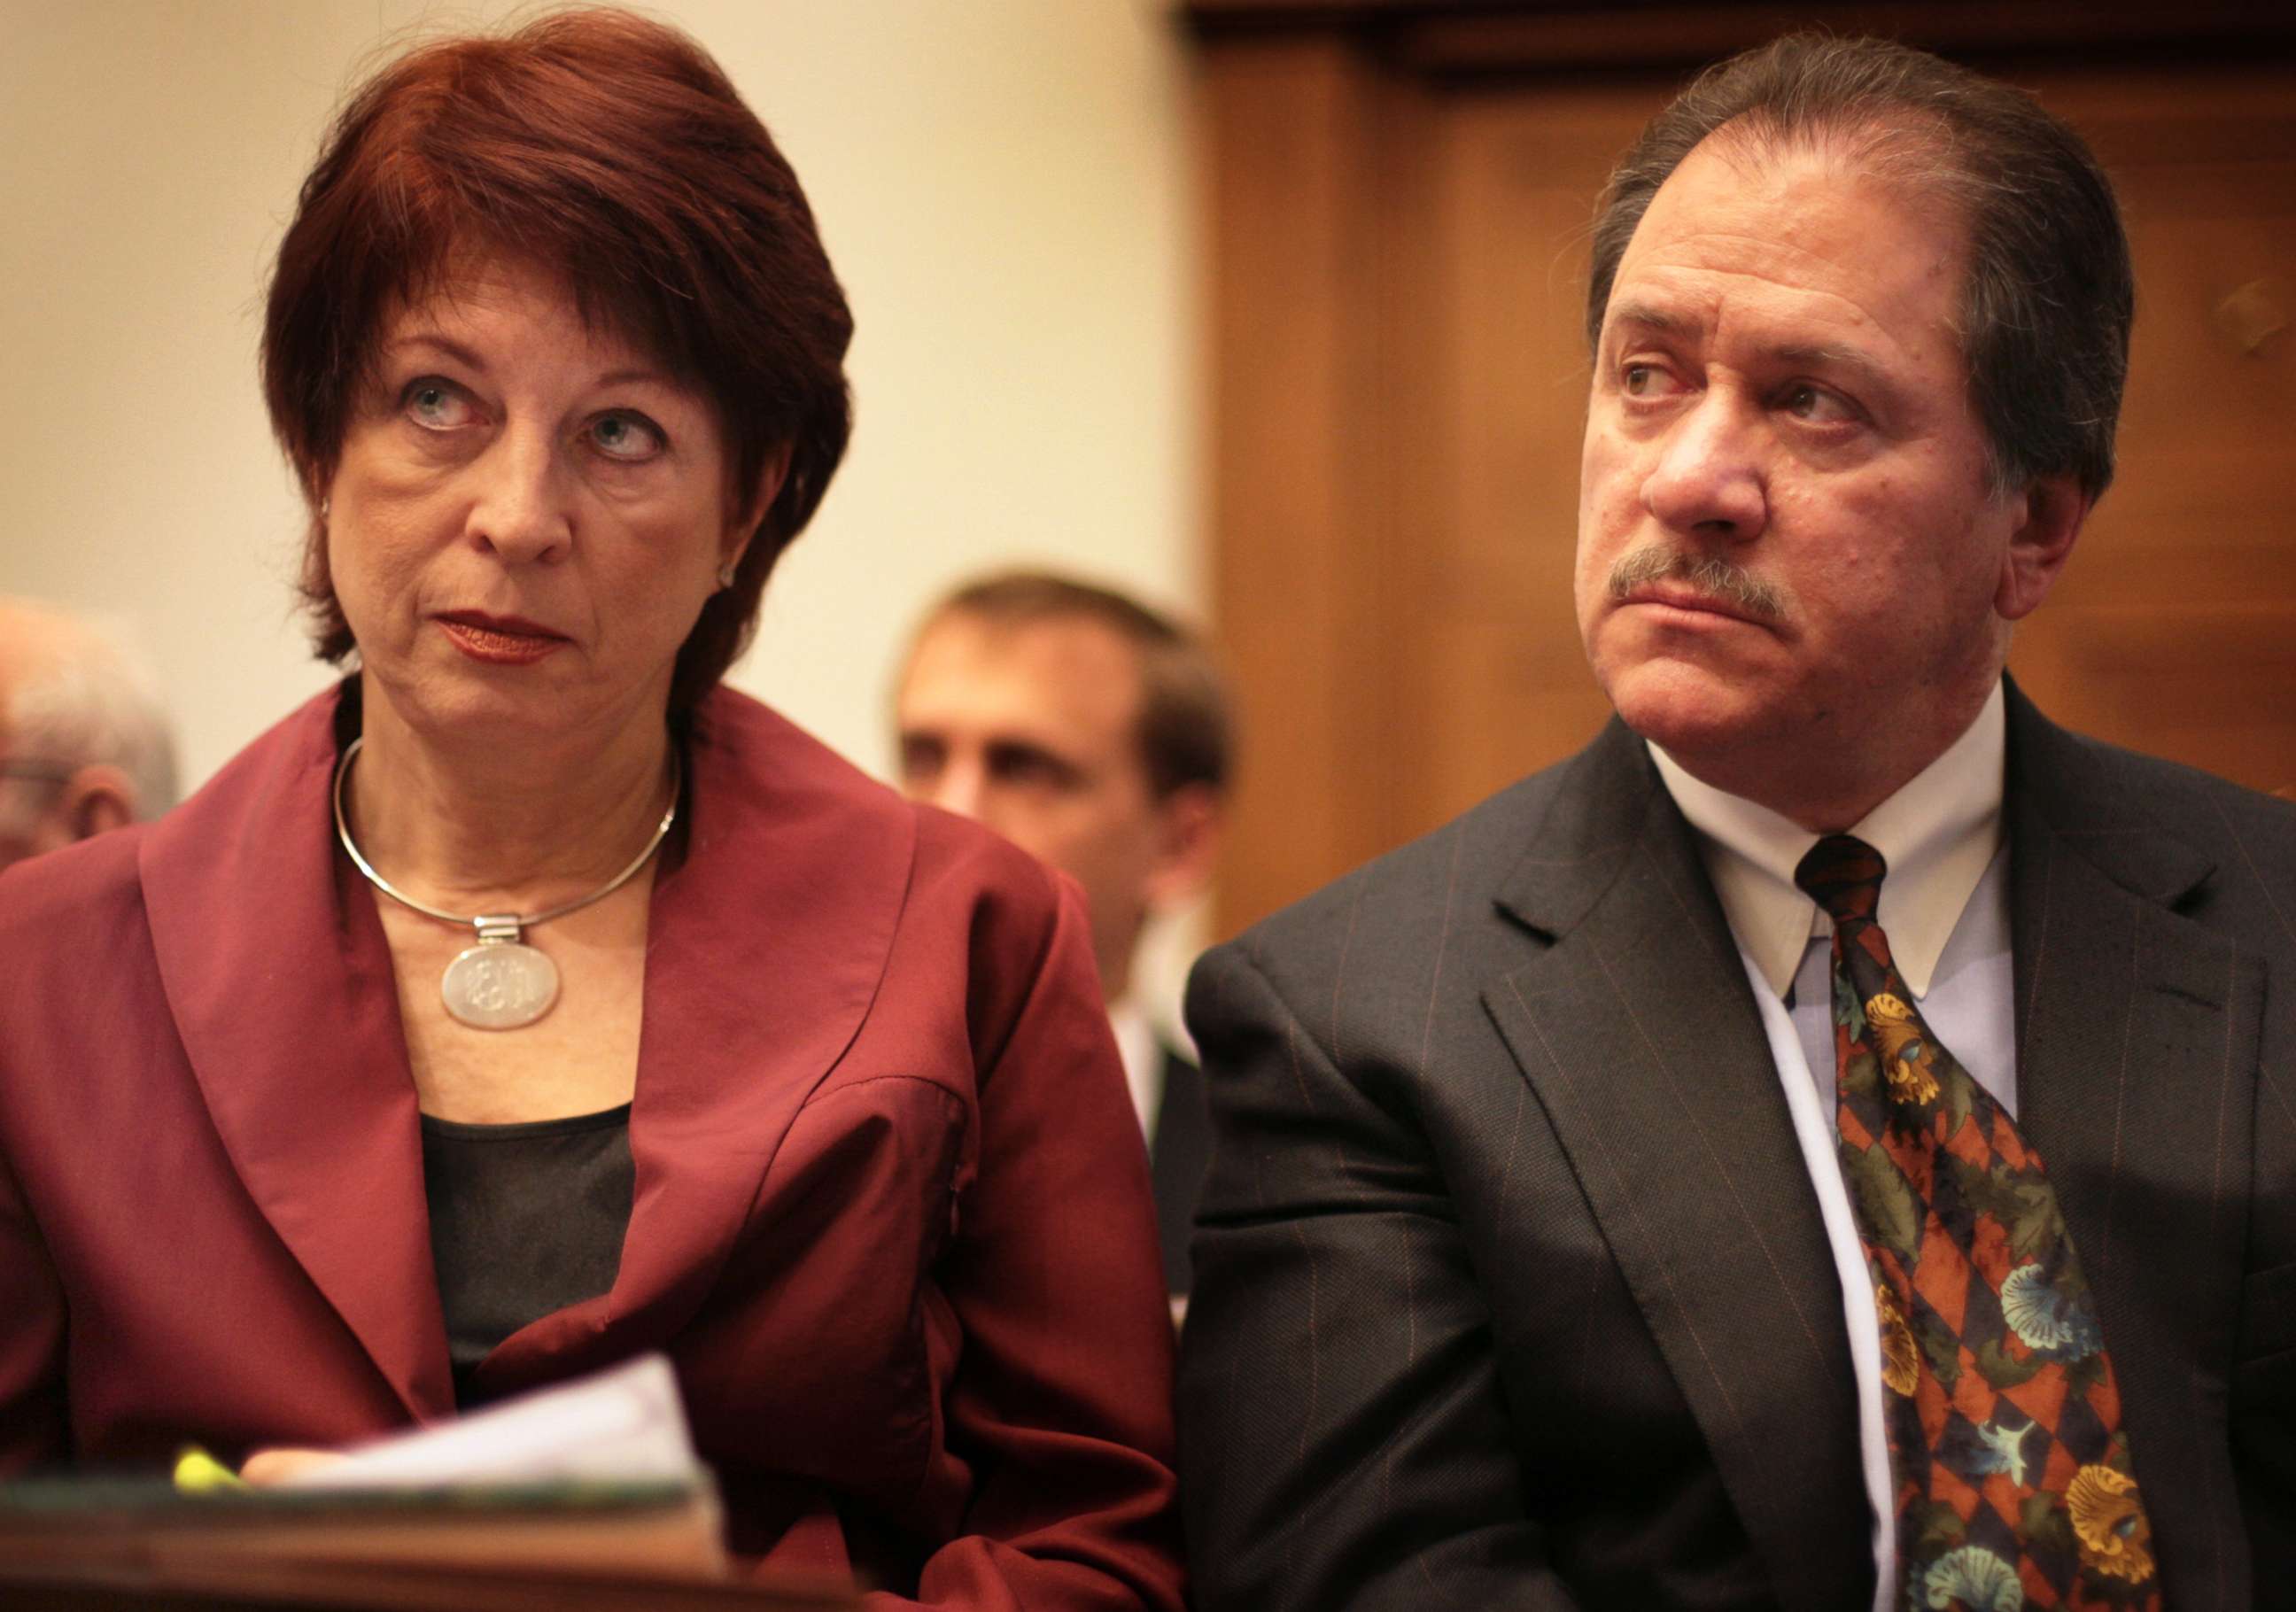 PHOTO: Victoria Toensing, left, and Joe diGenova listen as former CIA agent Valerie Plame Wilson testifies before the House Oversight and Government Reform Committee on Capitol Hill, March 16, 2007 in Washington, D.C.